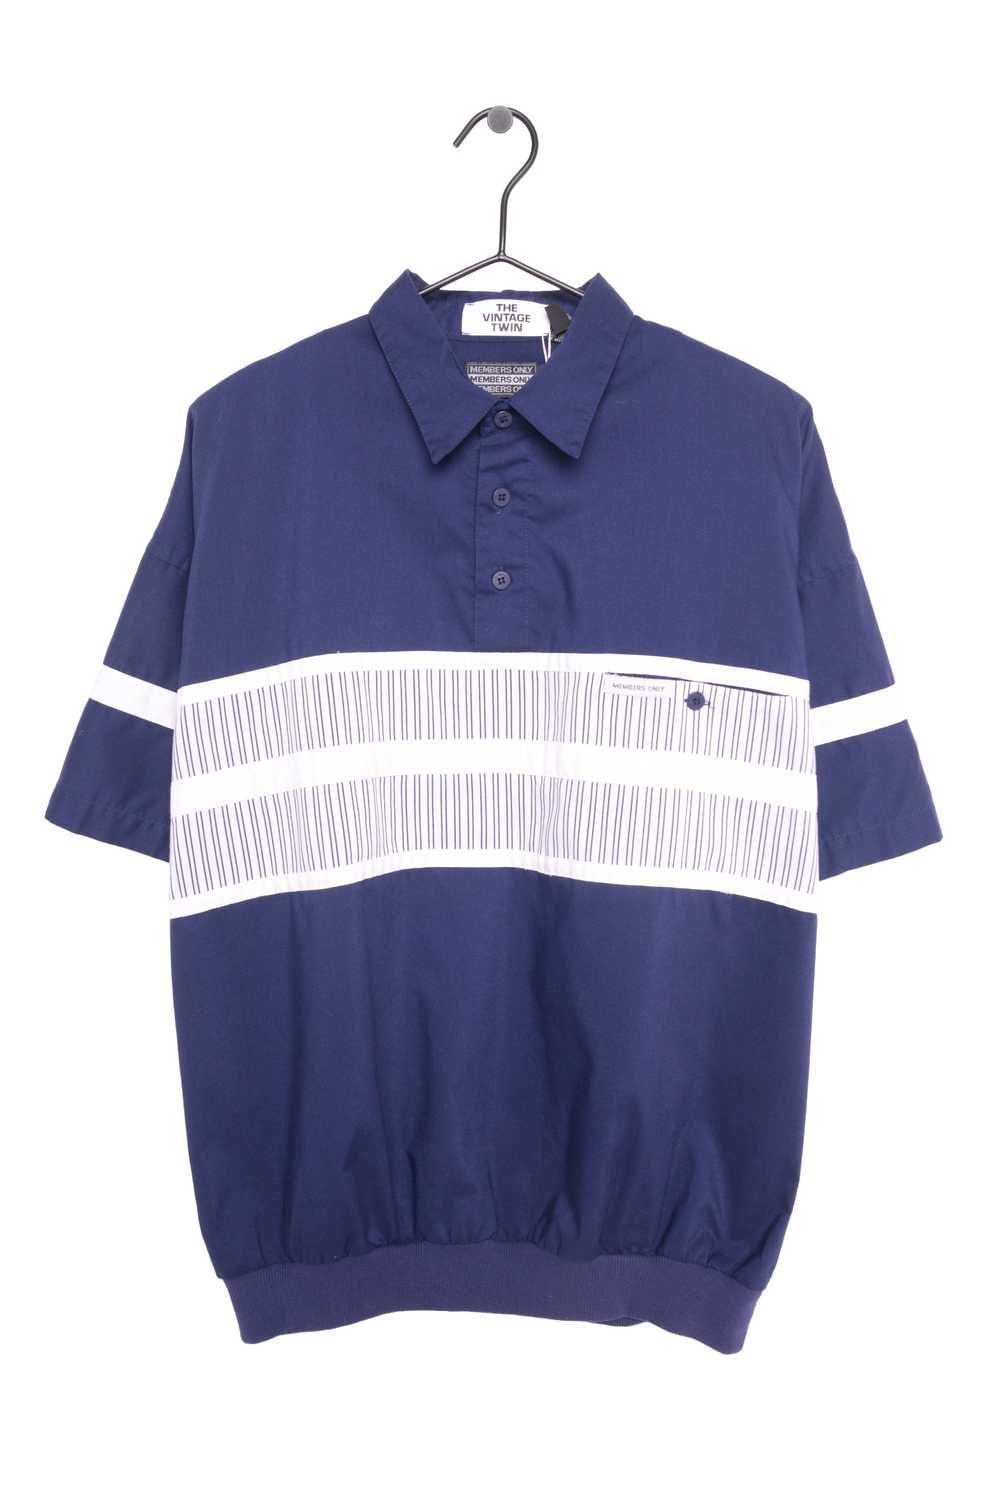 1980s Member's Only Polo - image 1